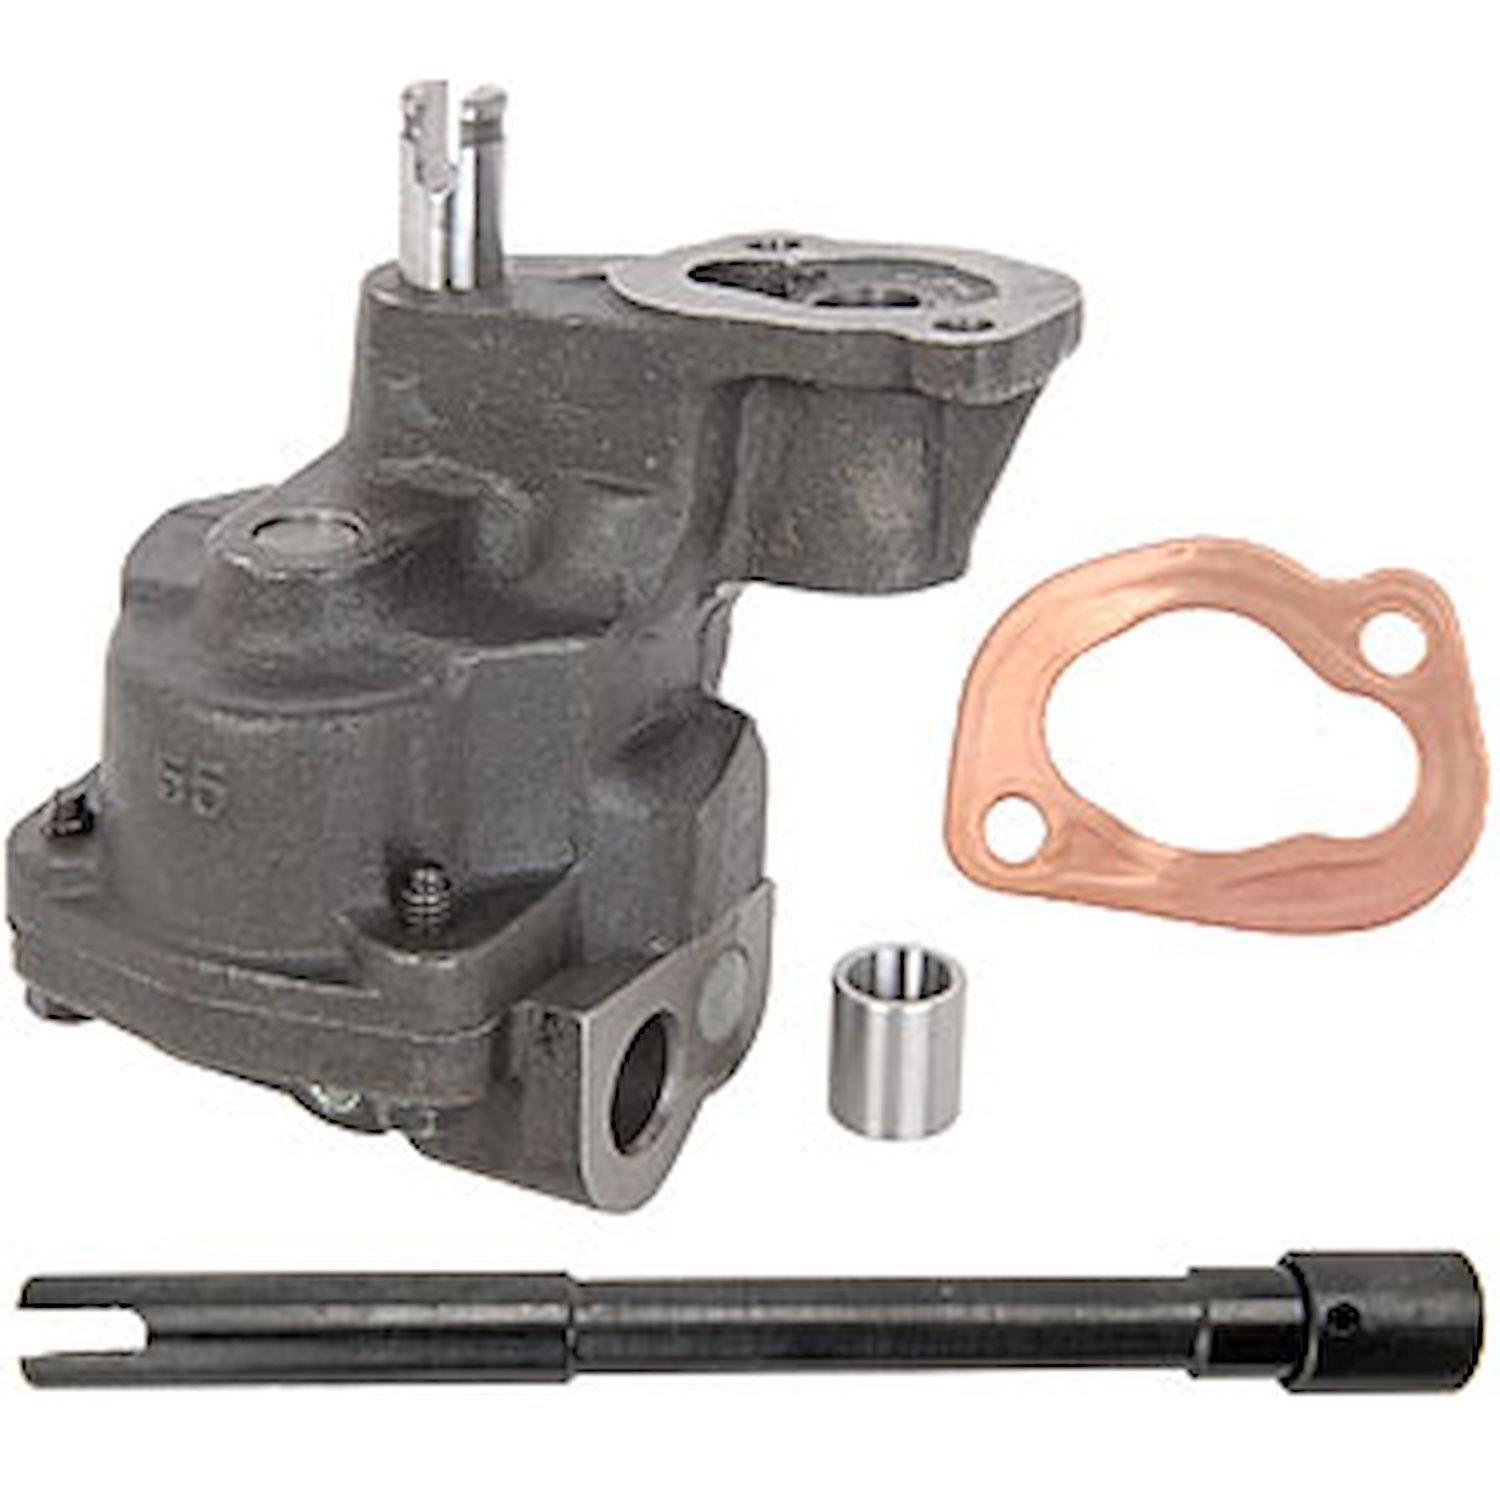 Oil Pump Adjustable for Small Block Chevy Street,